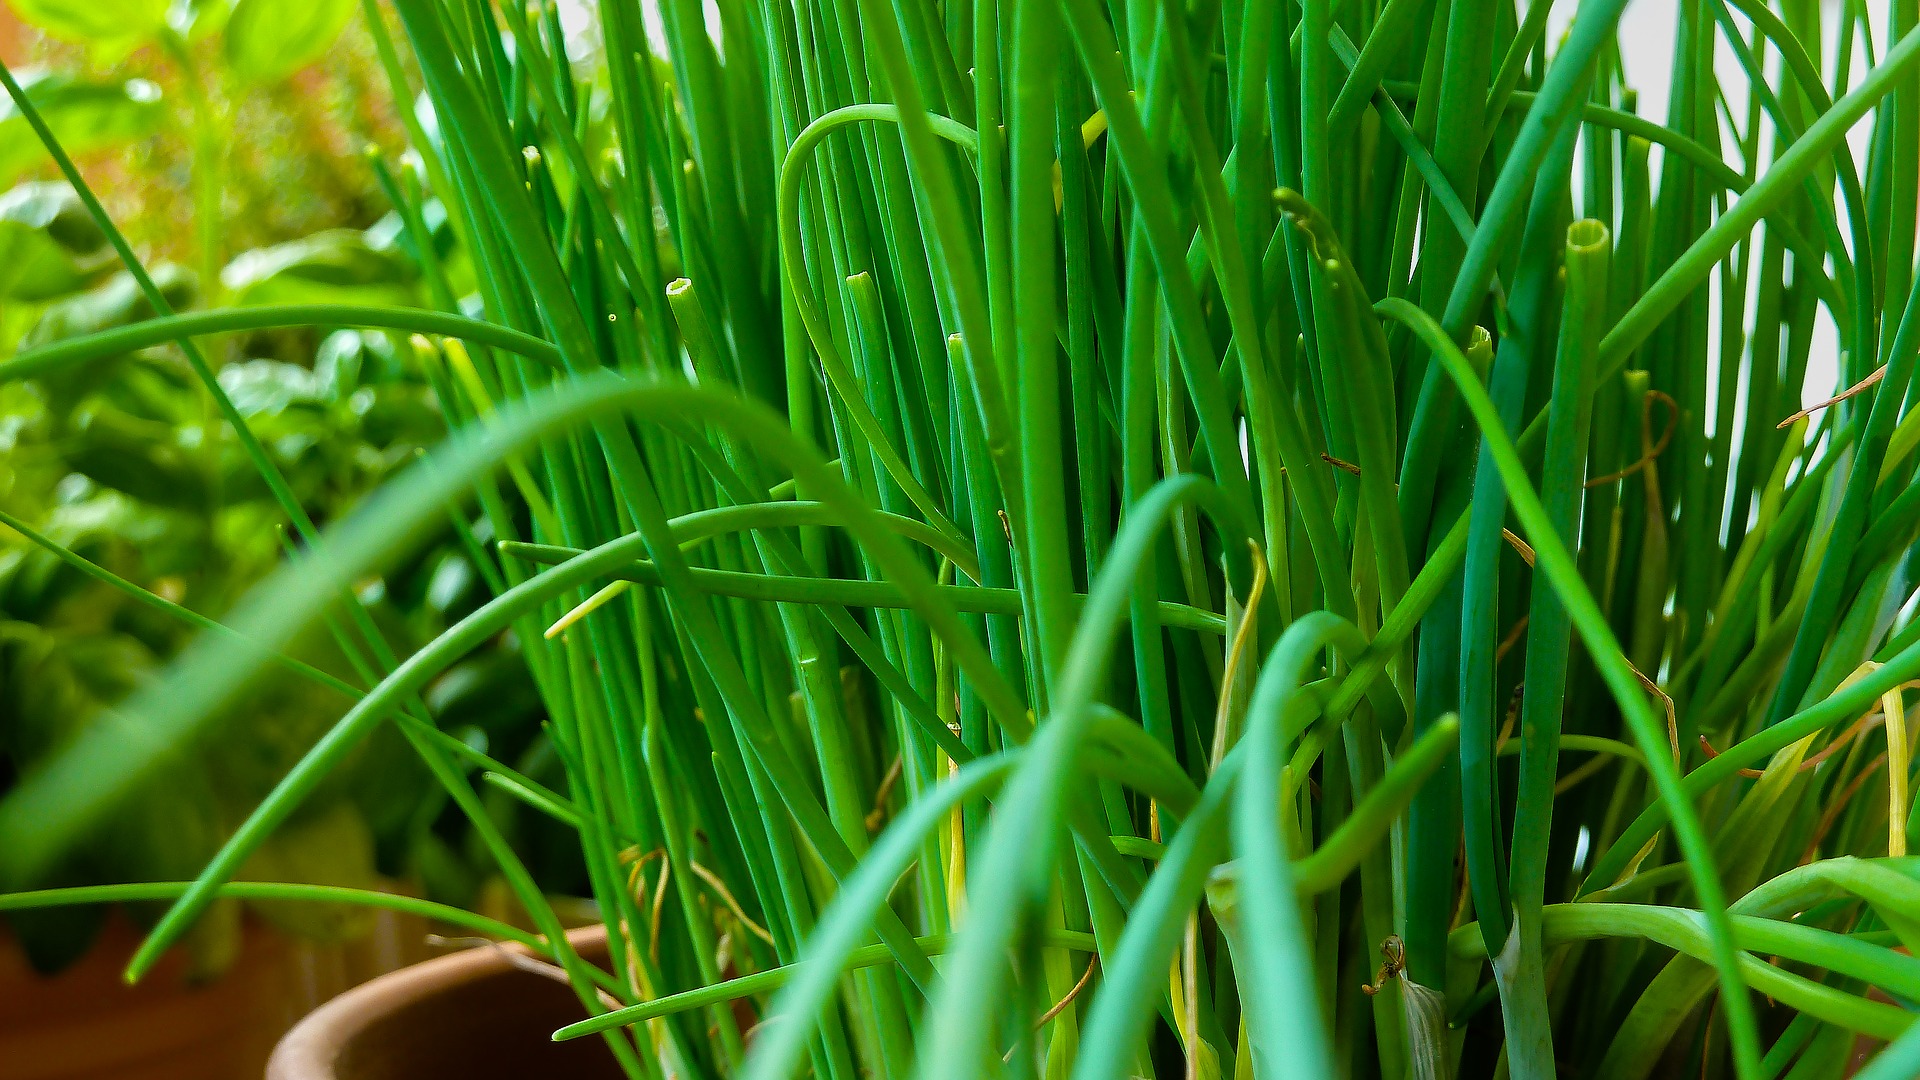 Image: How to grow a fresh supply of chives